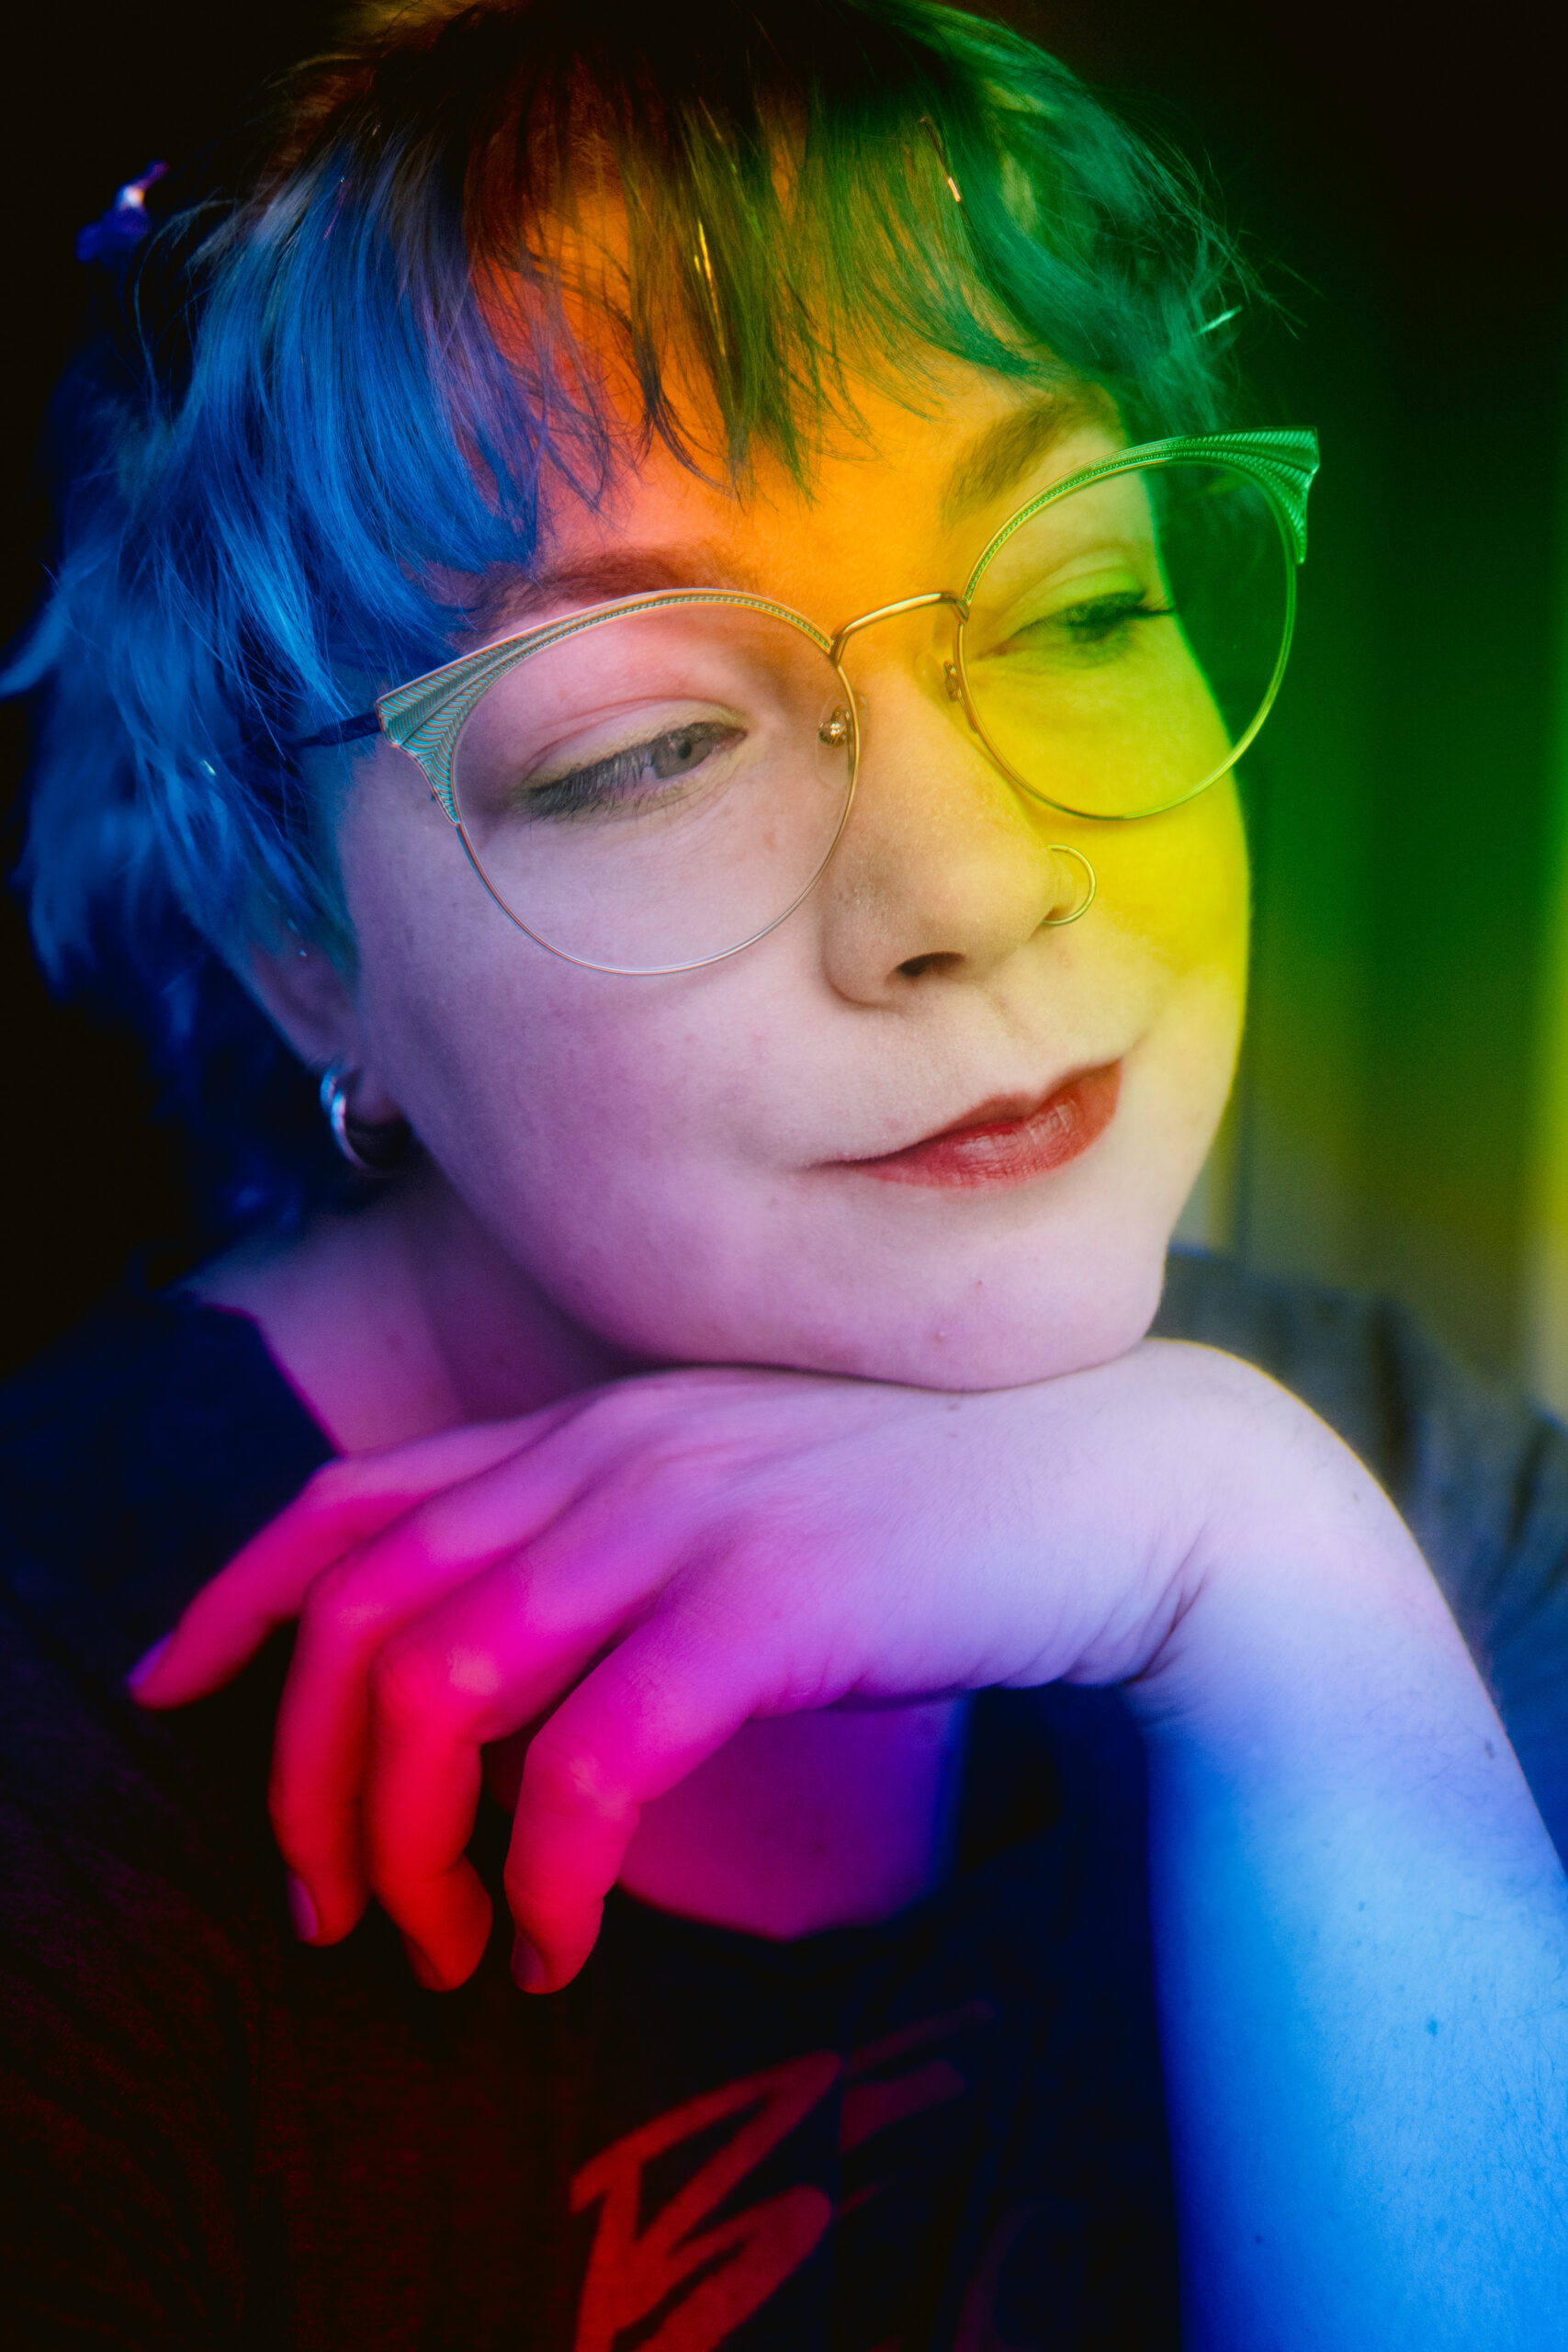 Portrait of a nonbinary subject with blue hair, glasses, and red lipstick. Their head is resting on their hand and they are looking away off camera. There is a rainbow effect over the entire image.